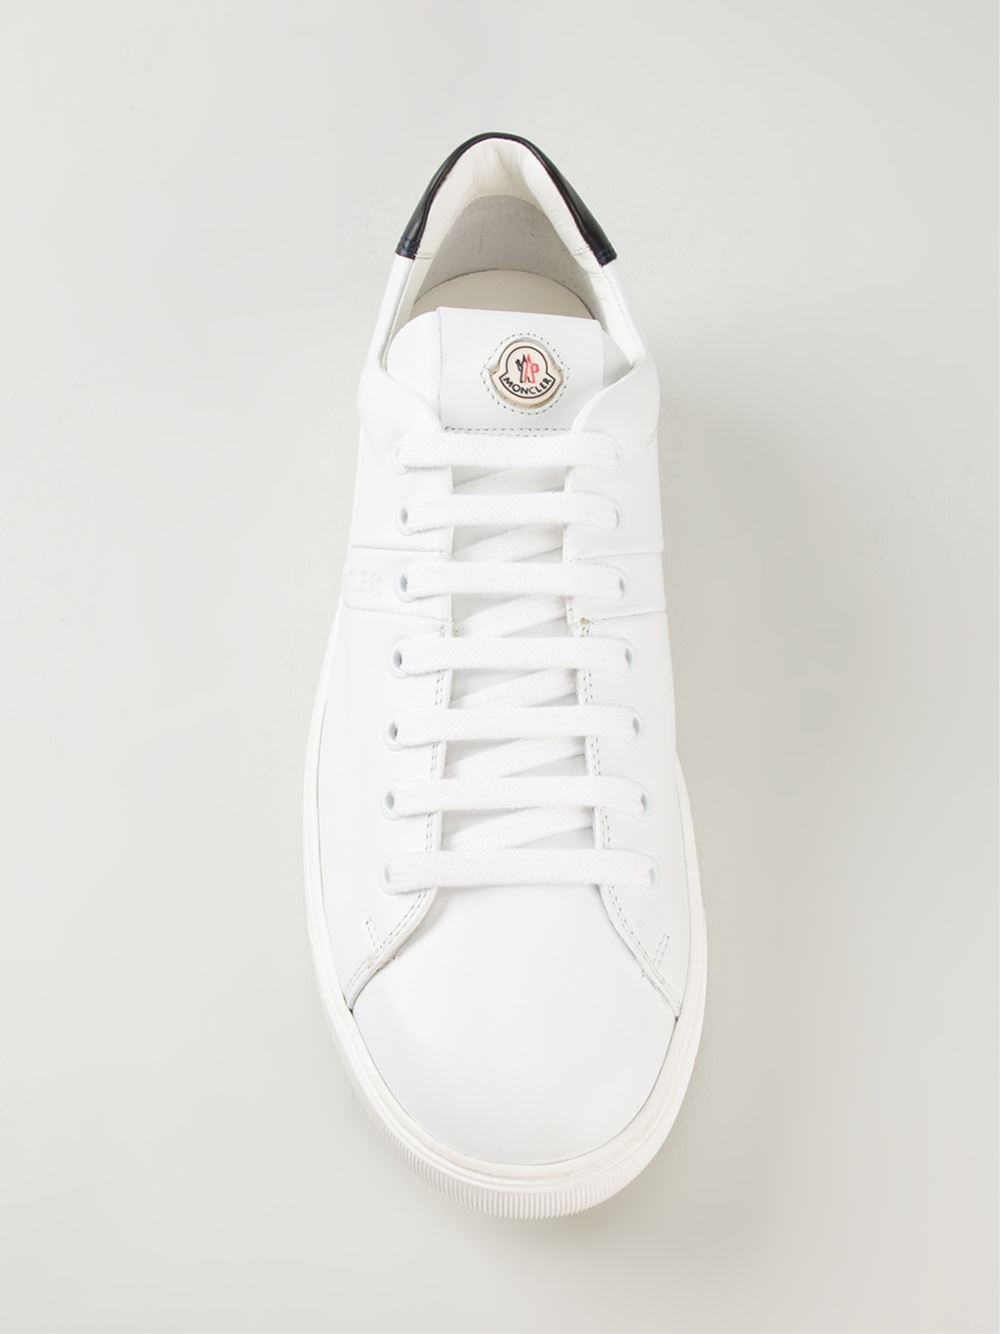 moncler sneakers white